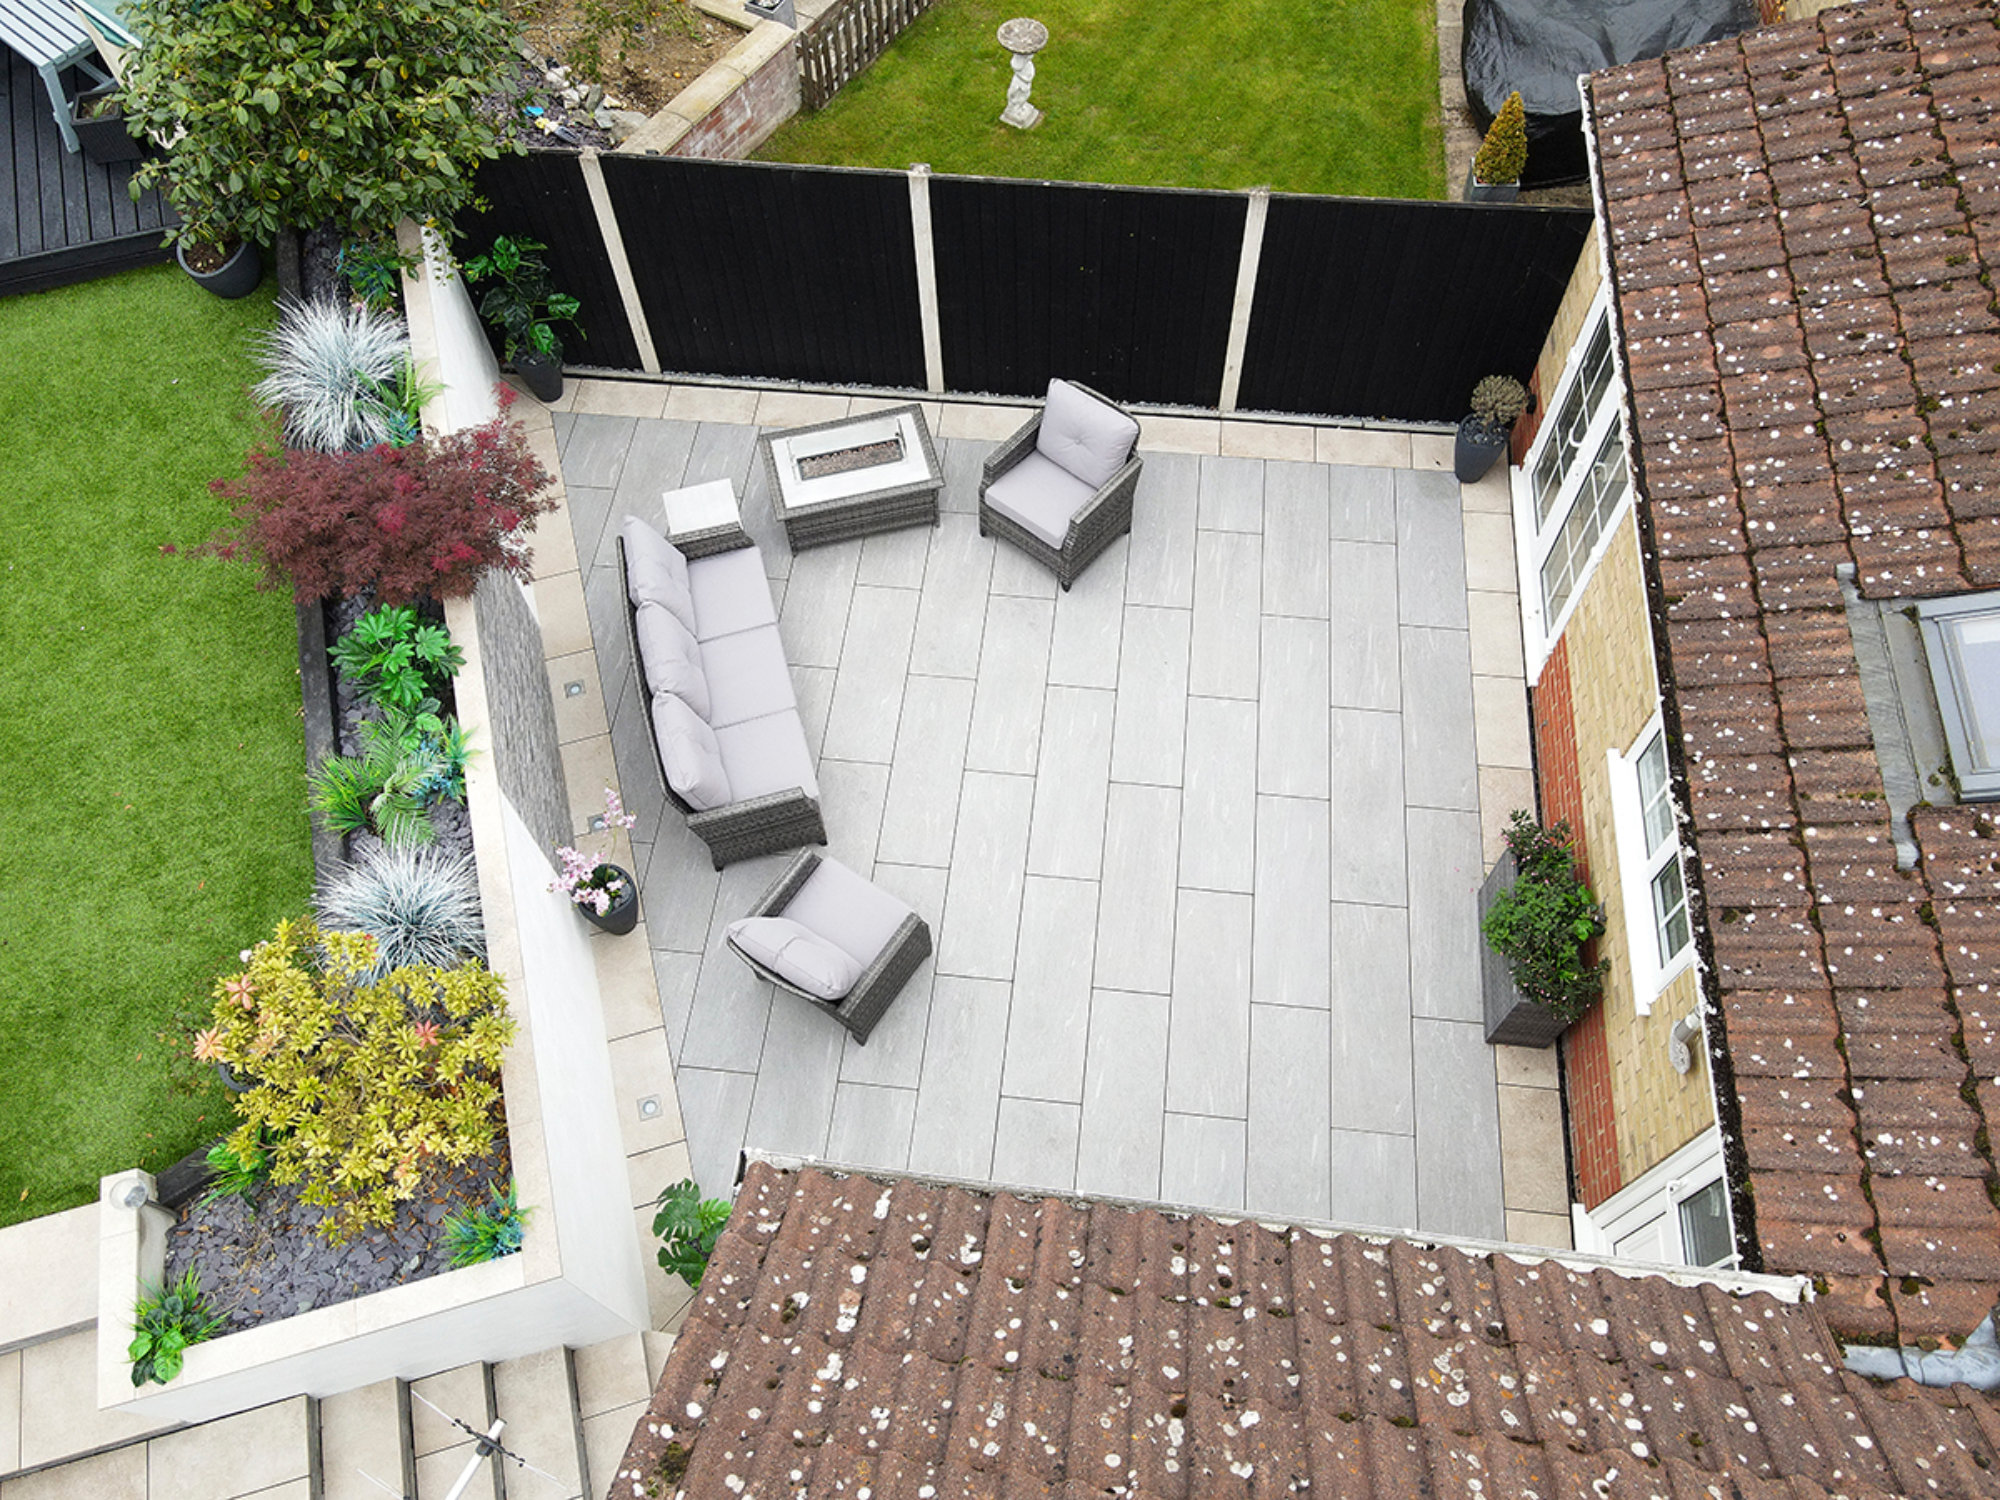 Ideas for a Small Garden: Tips from Essex Elite Paving